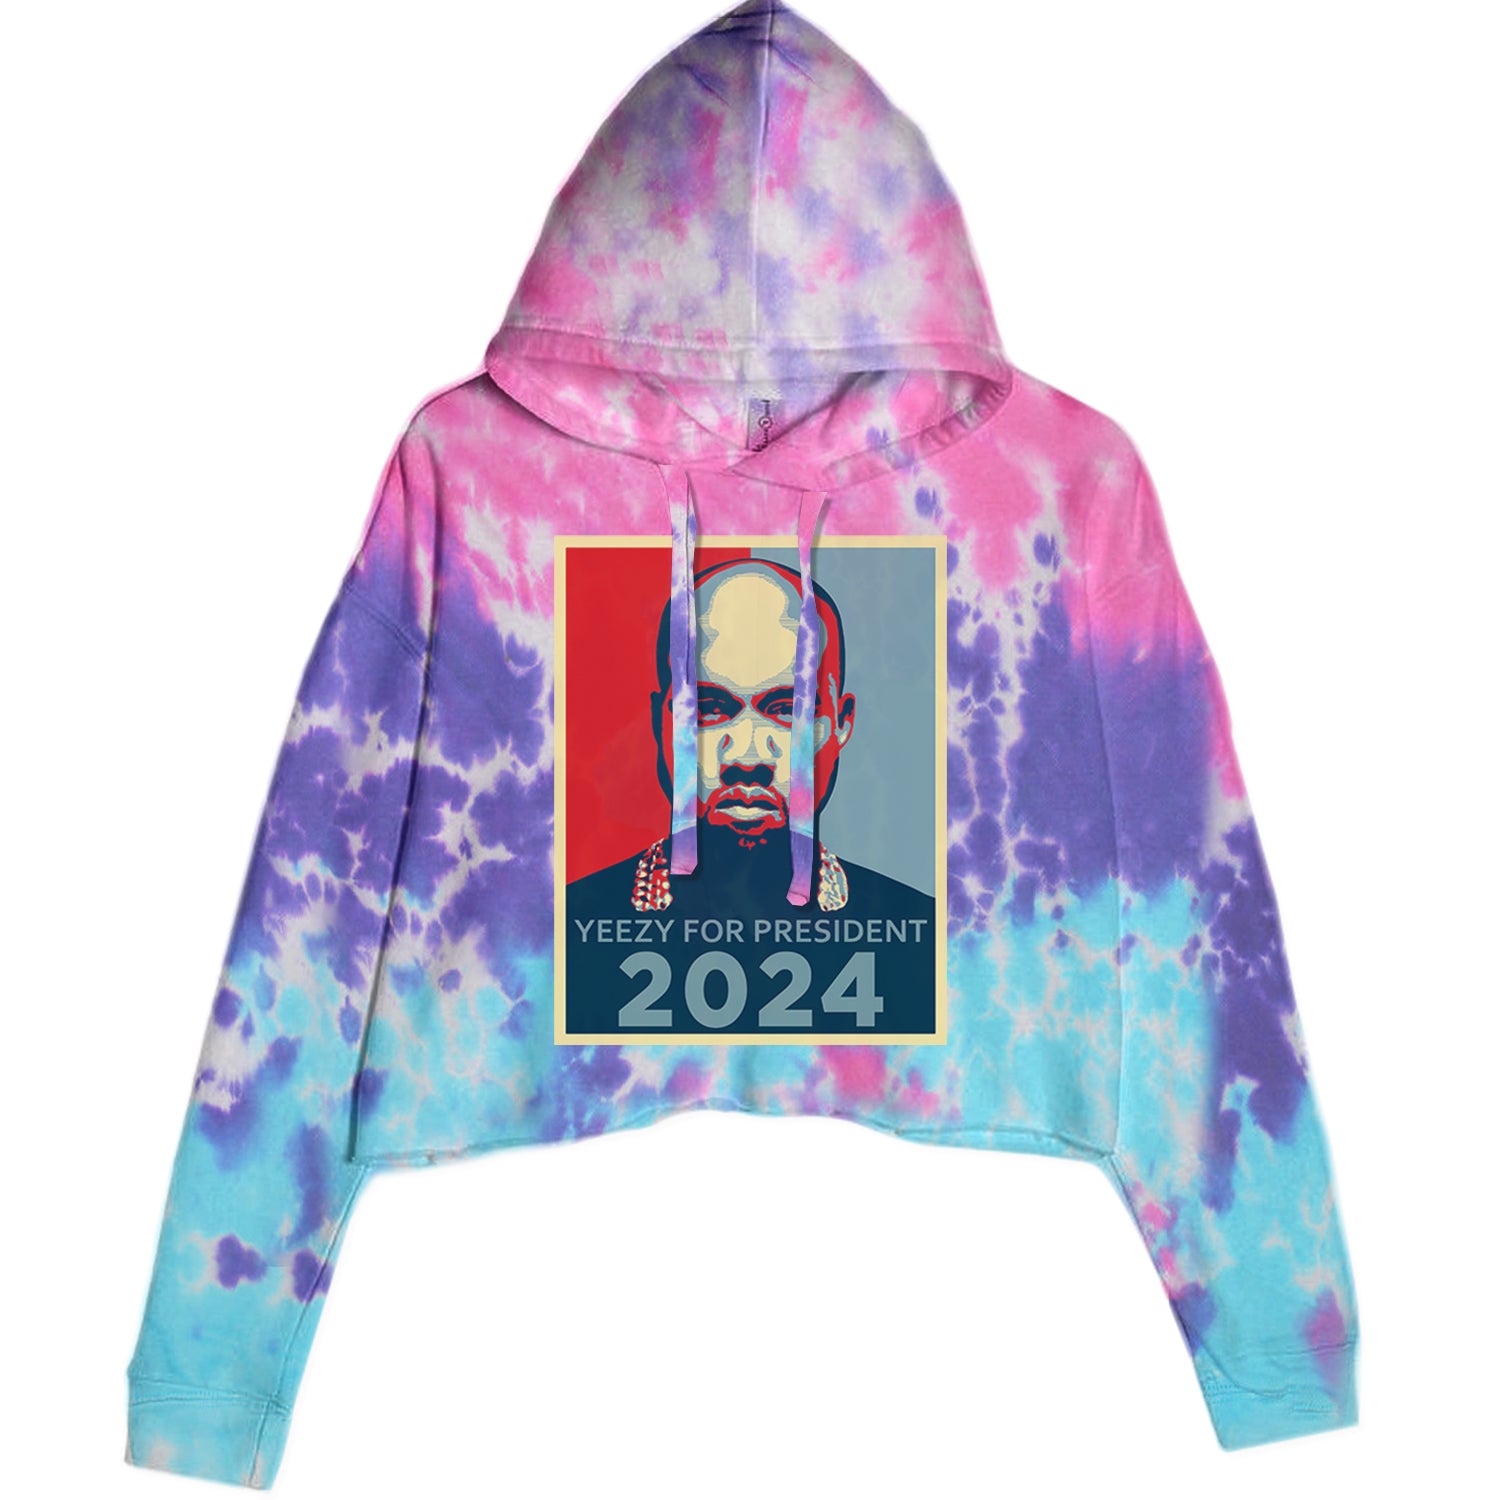 Yeezus For President Vote for Ye Values! Sweatshirt Cotton Candy